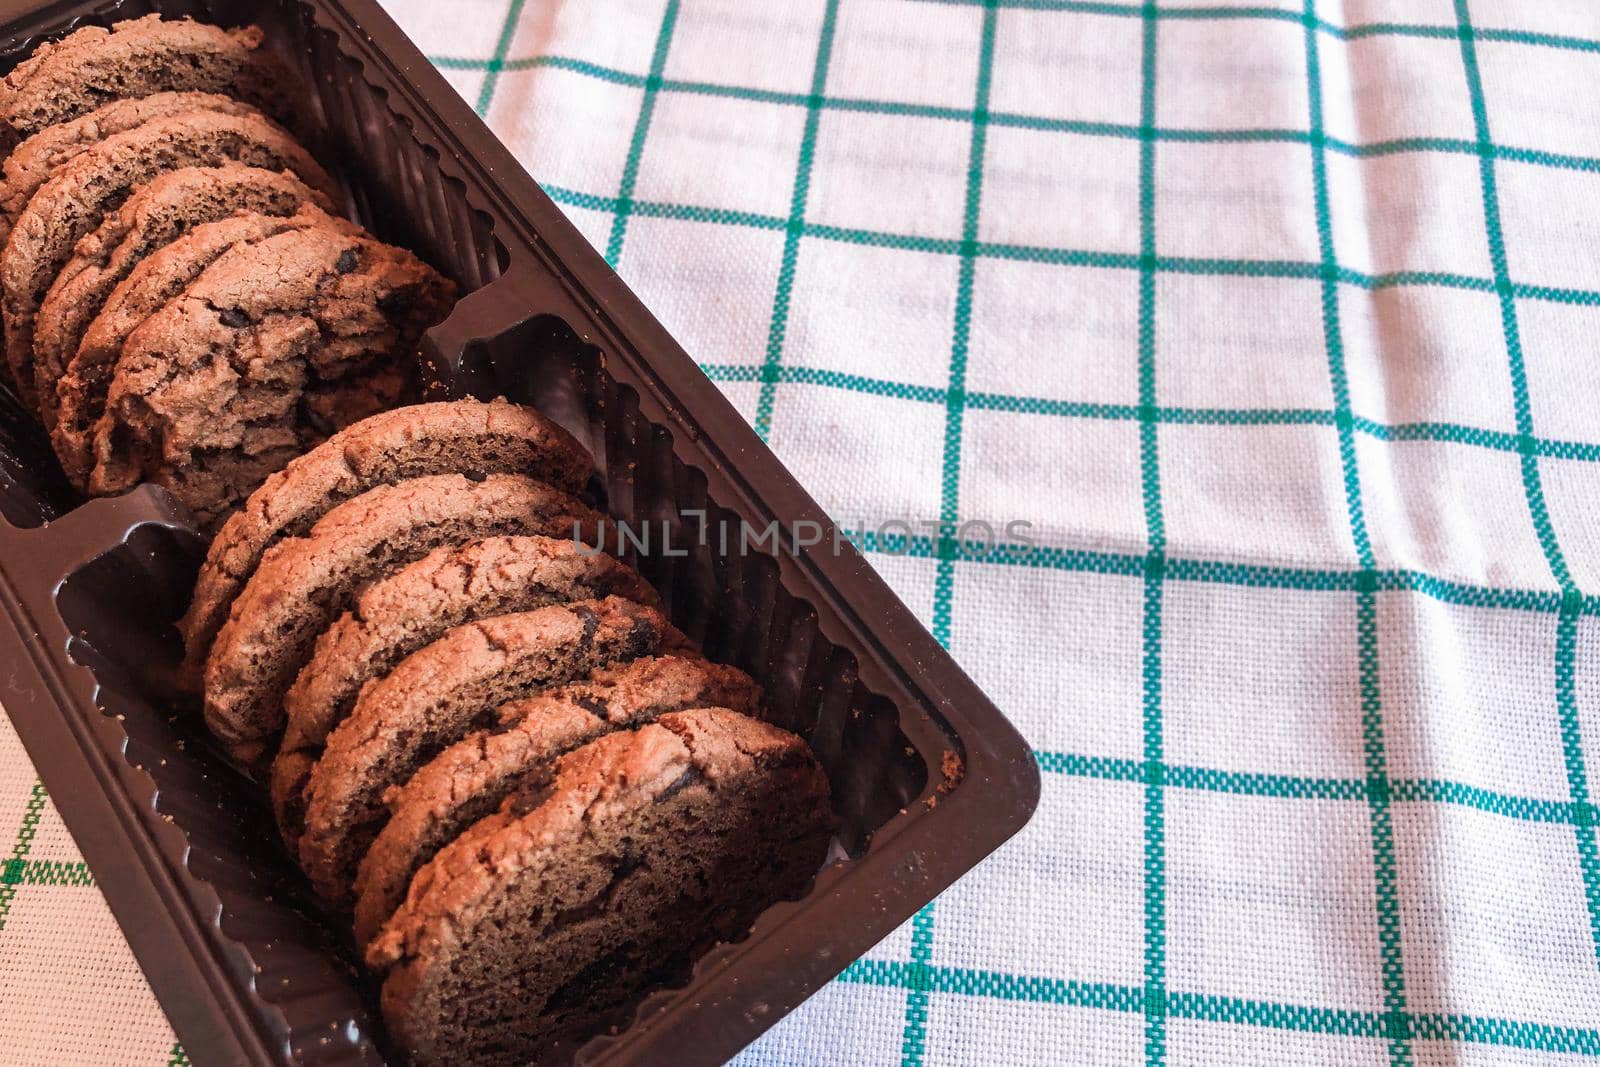 Chocolate cookies in packaging on cloth background.